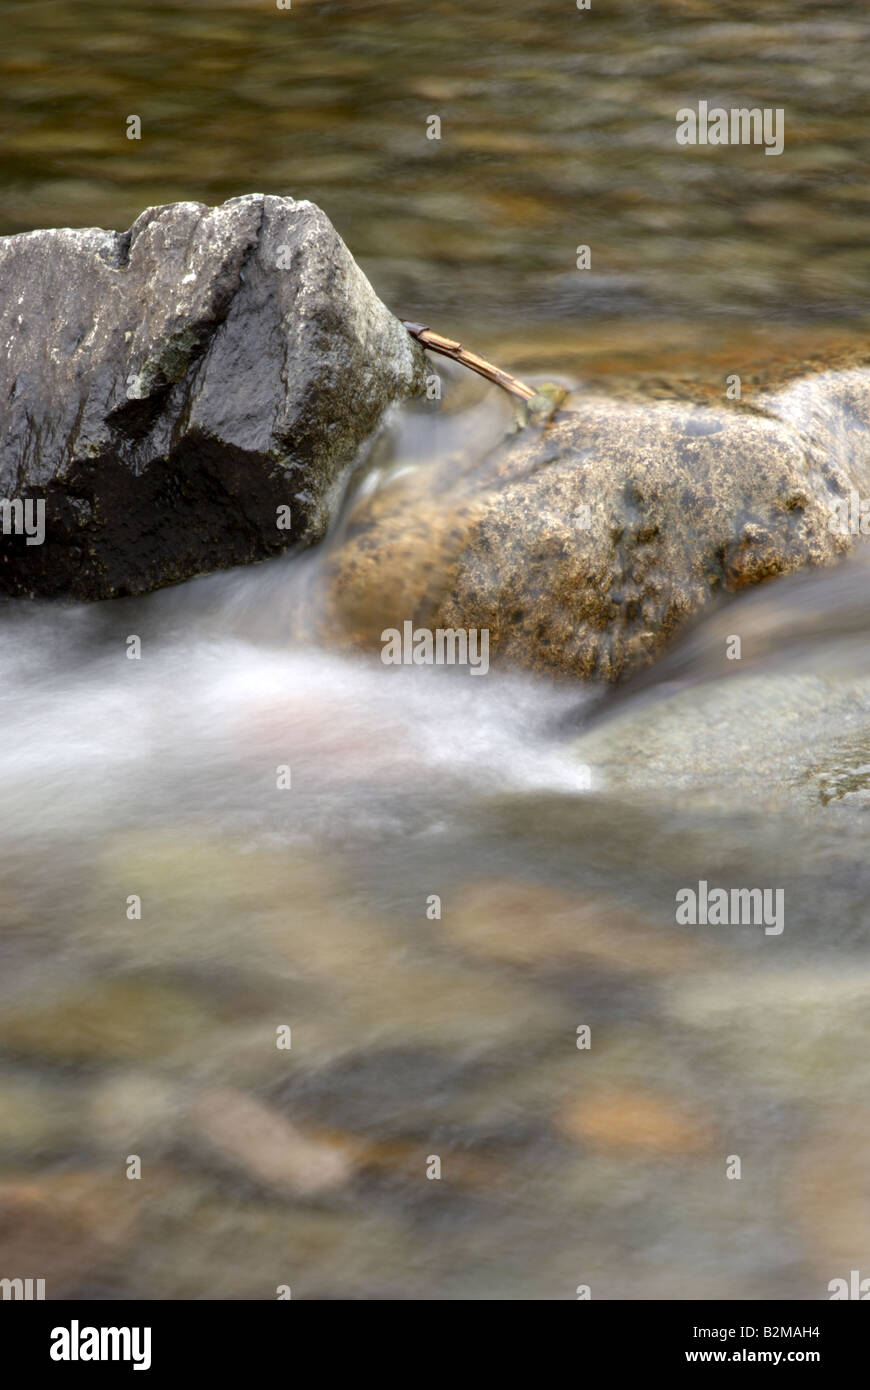 Water flowing over stones in a river bed Stock Photo